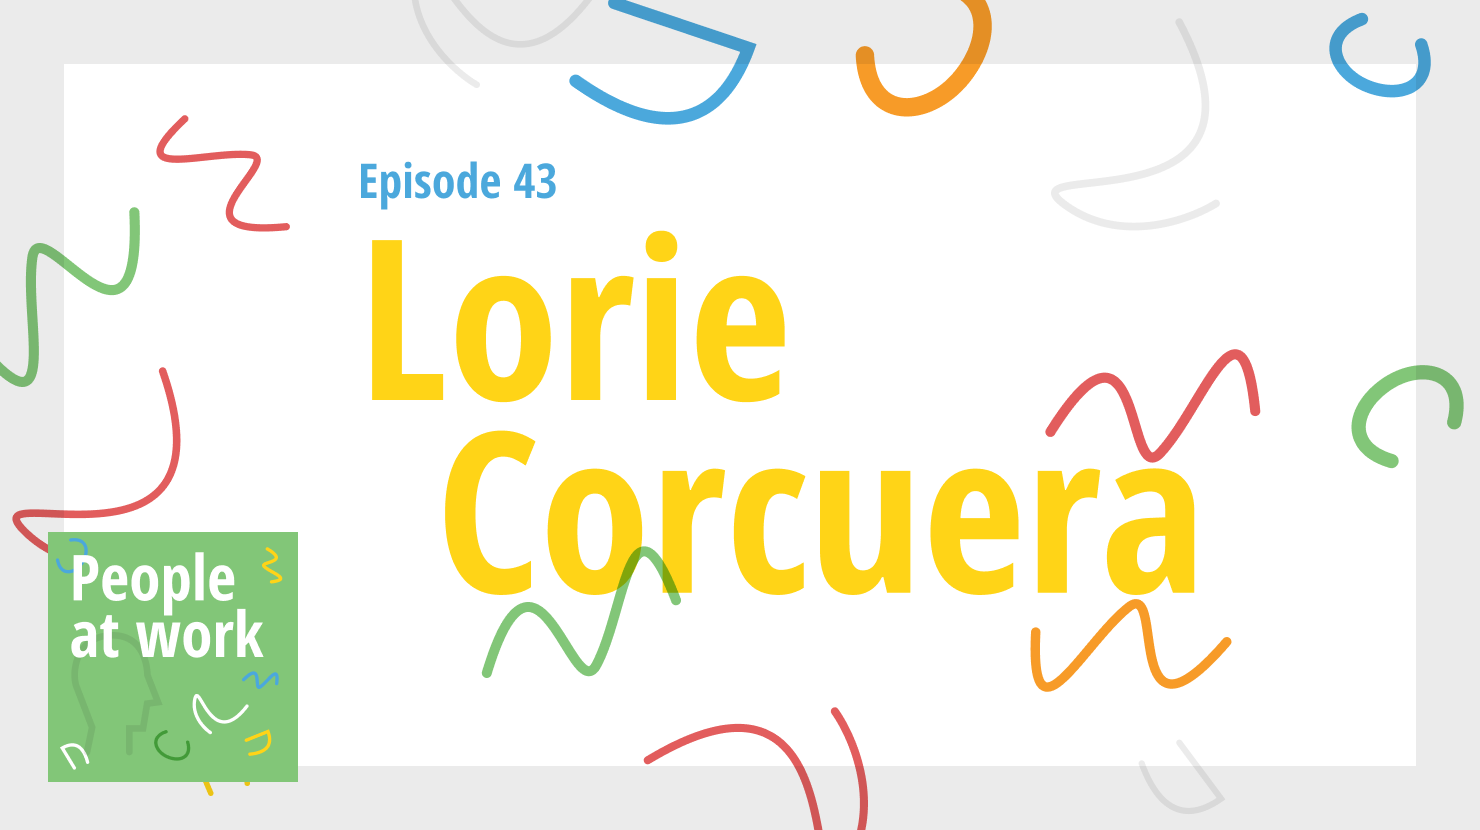 Workplace cultures are human experiences, says Lorie Corcuera